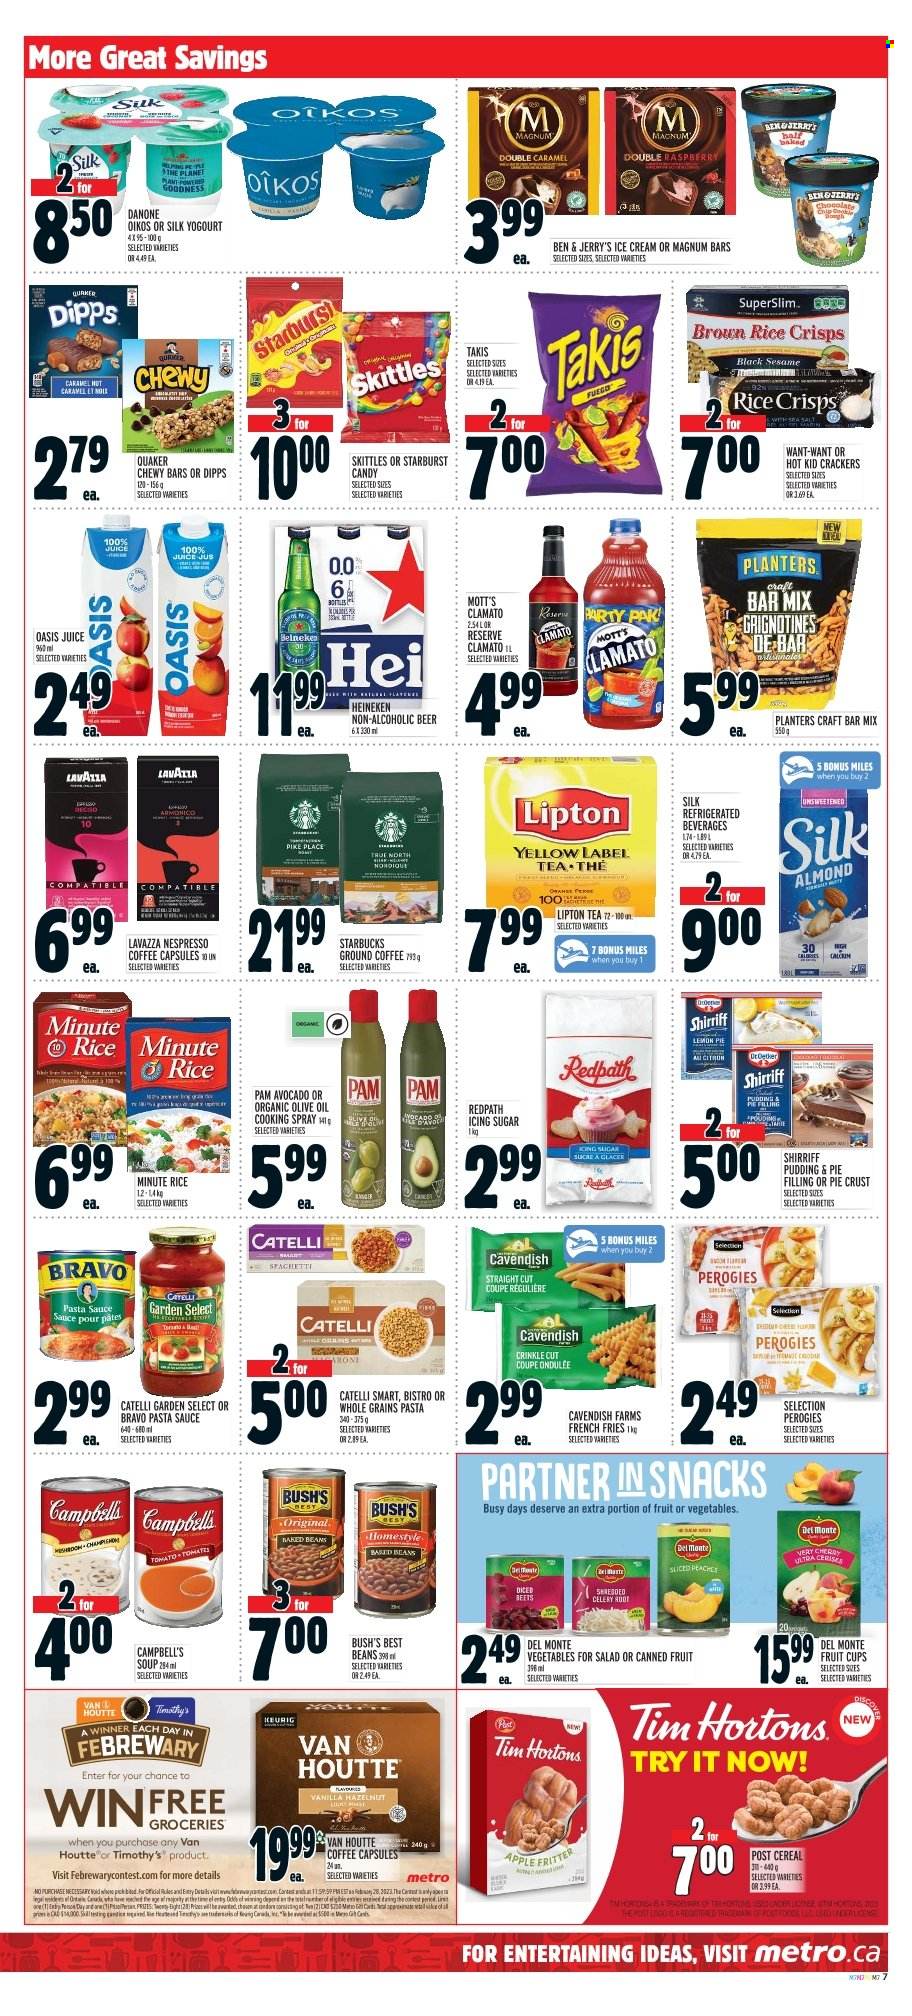 thumbnail - Metro Flyer - February 02, 2023 - February 08, 2023 - Sales products - celery, avocado, fruit cup, peaches, Mott's, Campbell's, spaghetti, pasta sauce, soup, sauce, Quaker, pudding, Oikos, Magnum, ice cream, Ben & Jerry's, potato fries, french fries, snack, crackers, Skittles, Starburst, rice crisps, sugar, pie crust, pie filling, icing sugar, canned fruit, Del Monte, cereals, brown rice, cooking spray, olive oil, oil, Planters, juice, Clamato, tea, coffee, Nespresso, ground coffee, coffee capsules, Starbucks, Lavazza, beer, Heineken, Danone, Lipton. Page 8.